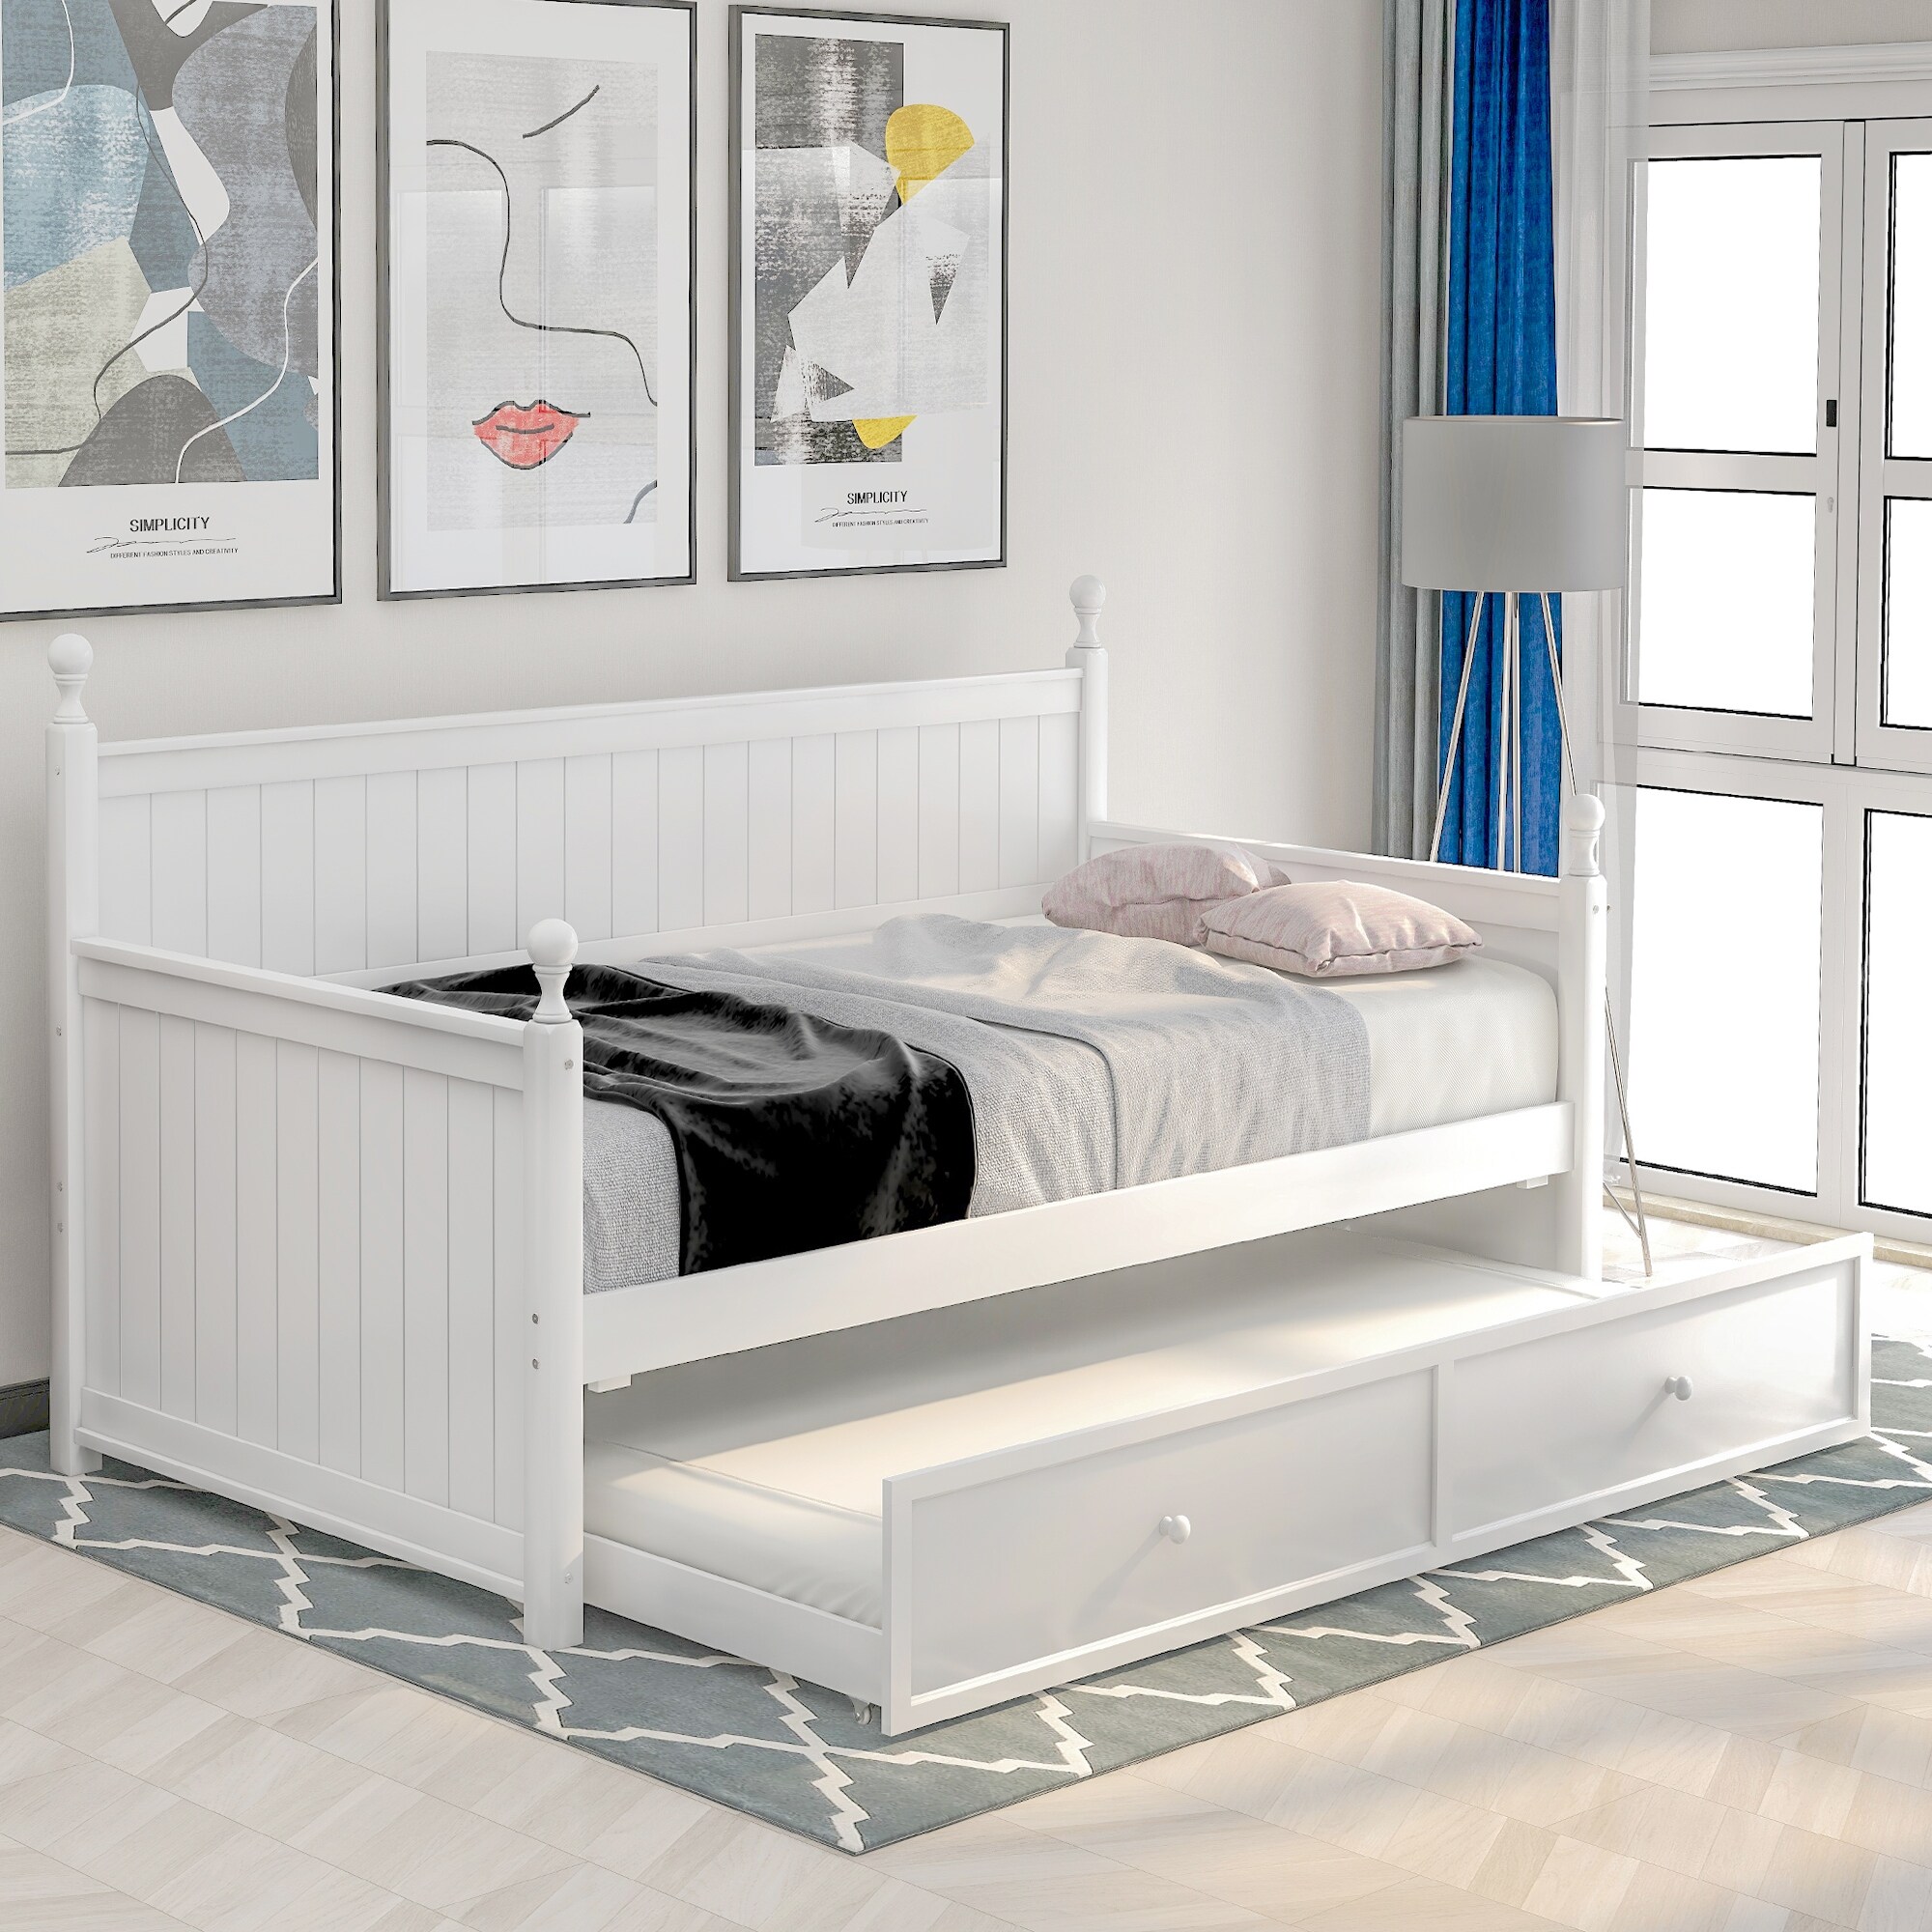 White Concise And Modern Twin Size Wood Daybed Sturdiness And Durability With Twin Size Trundle (white)